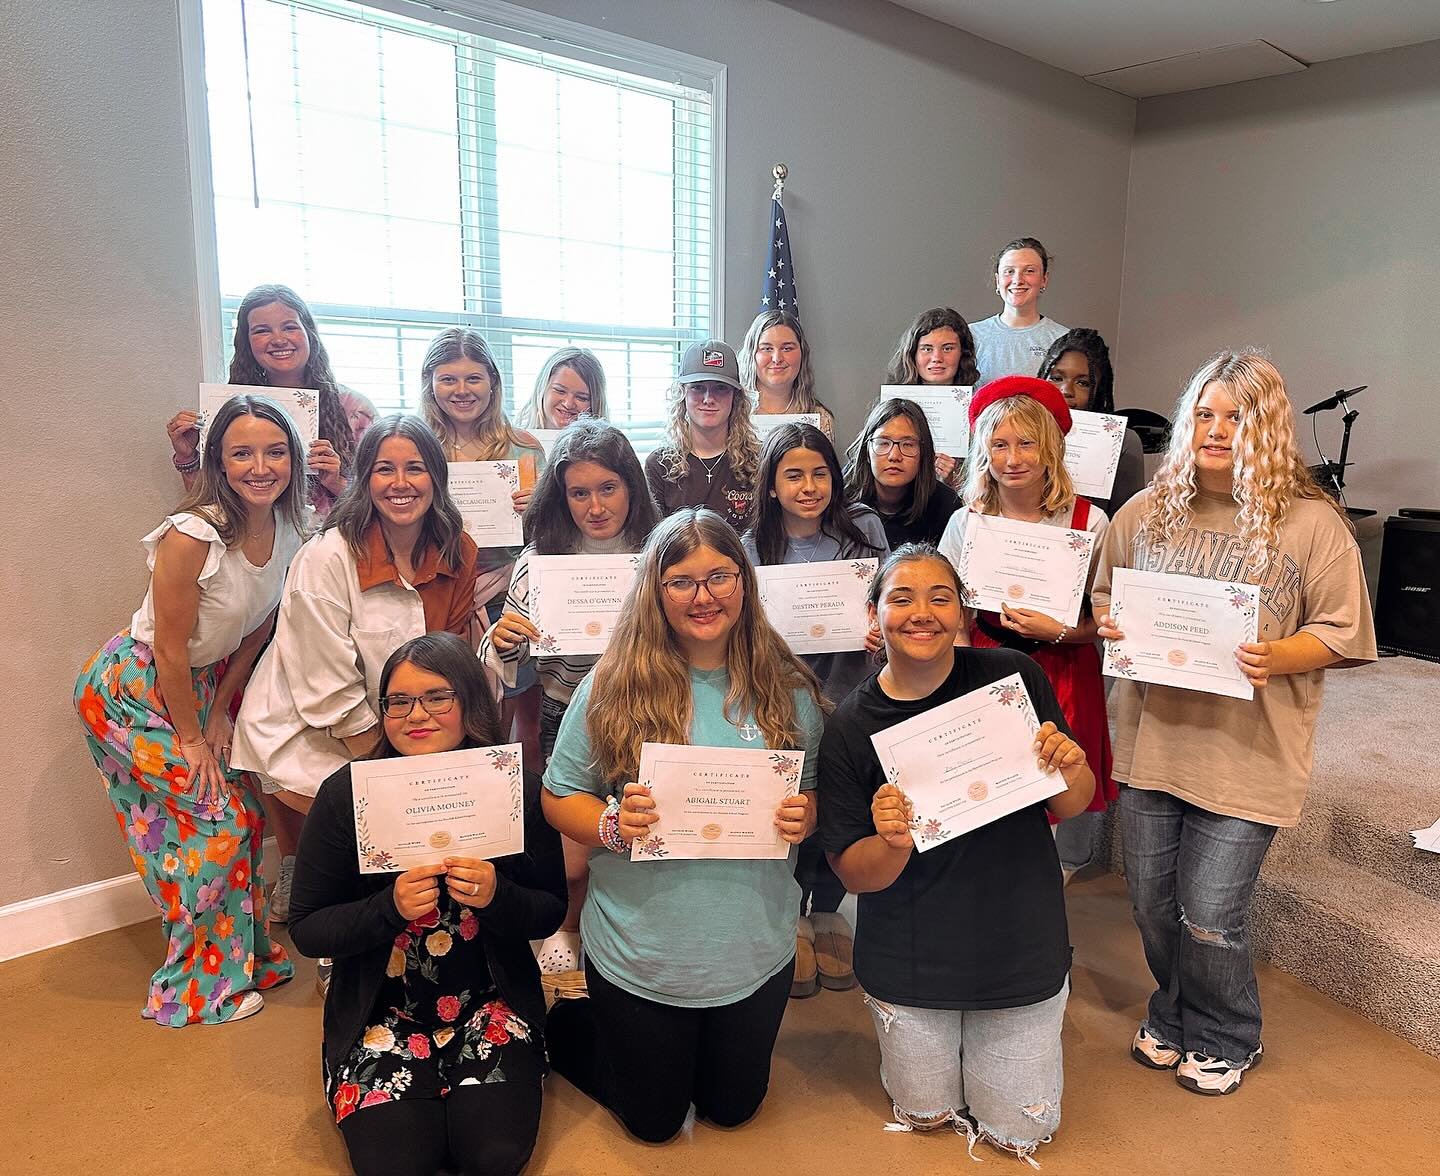 We are so proud of all these girls at the Renaissance School for their growth &amp; progress in our empower program! All of the girls received a certificate of achievement &amp; graduation gifts 🩷 thank you to everyone who sponsored a gift!